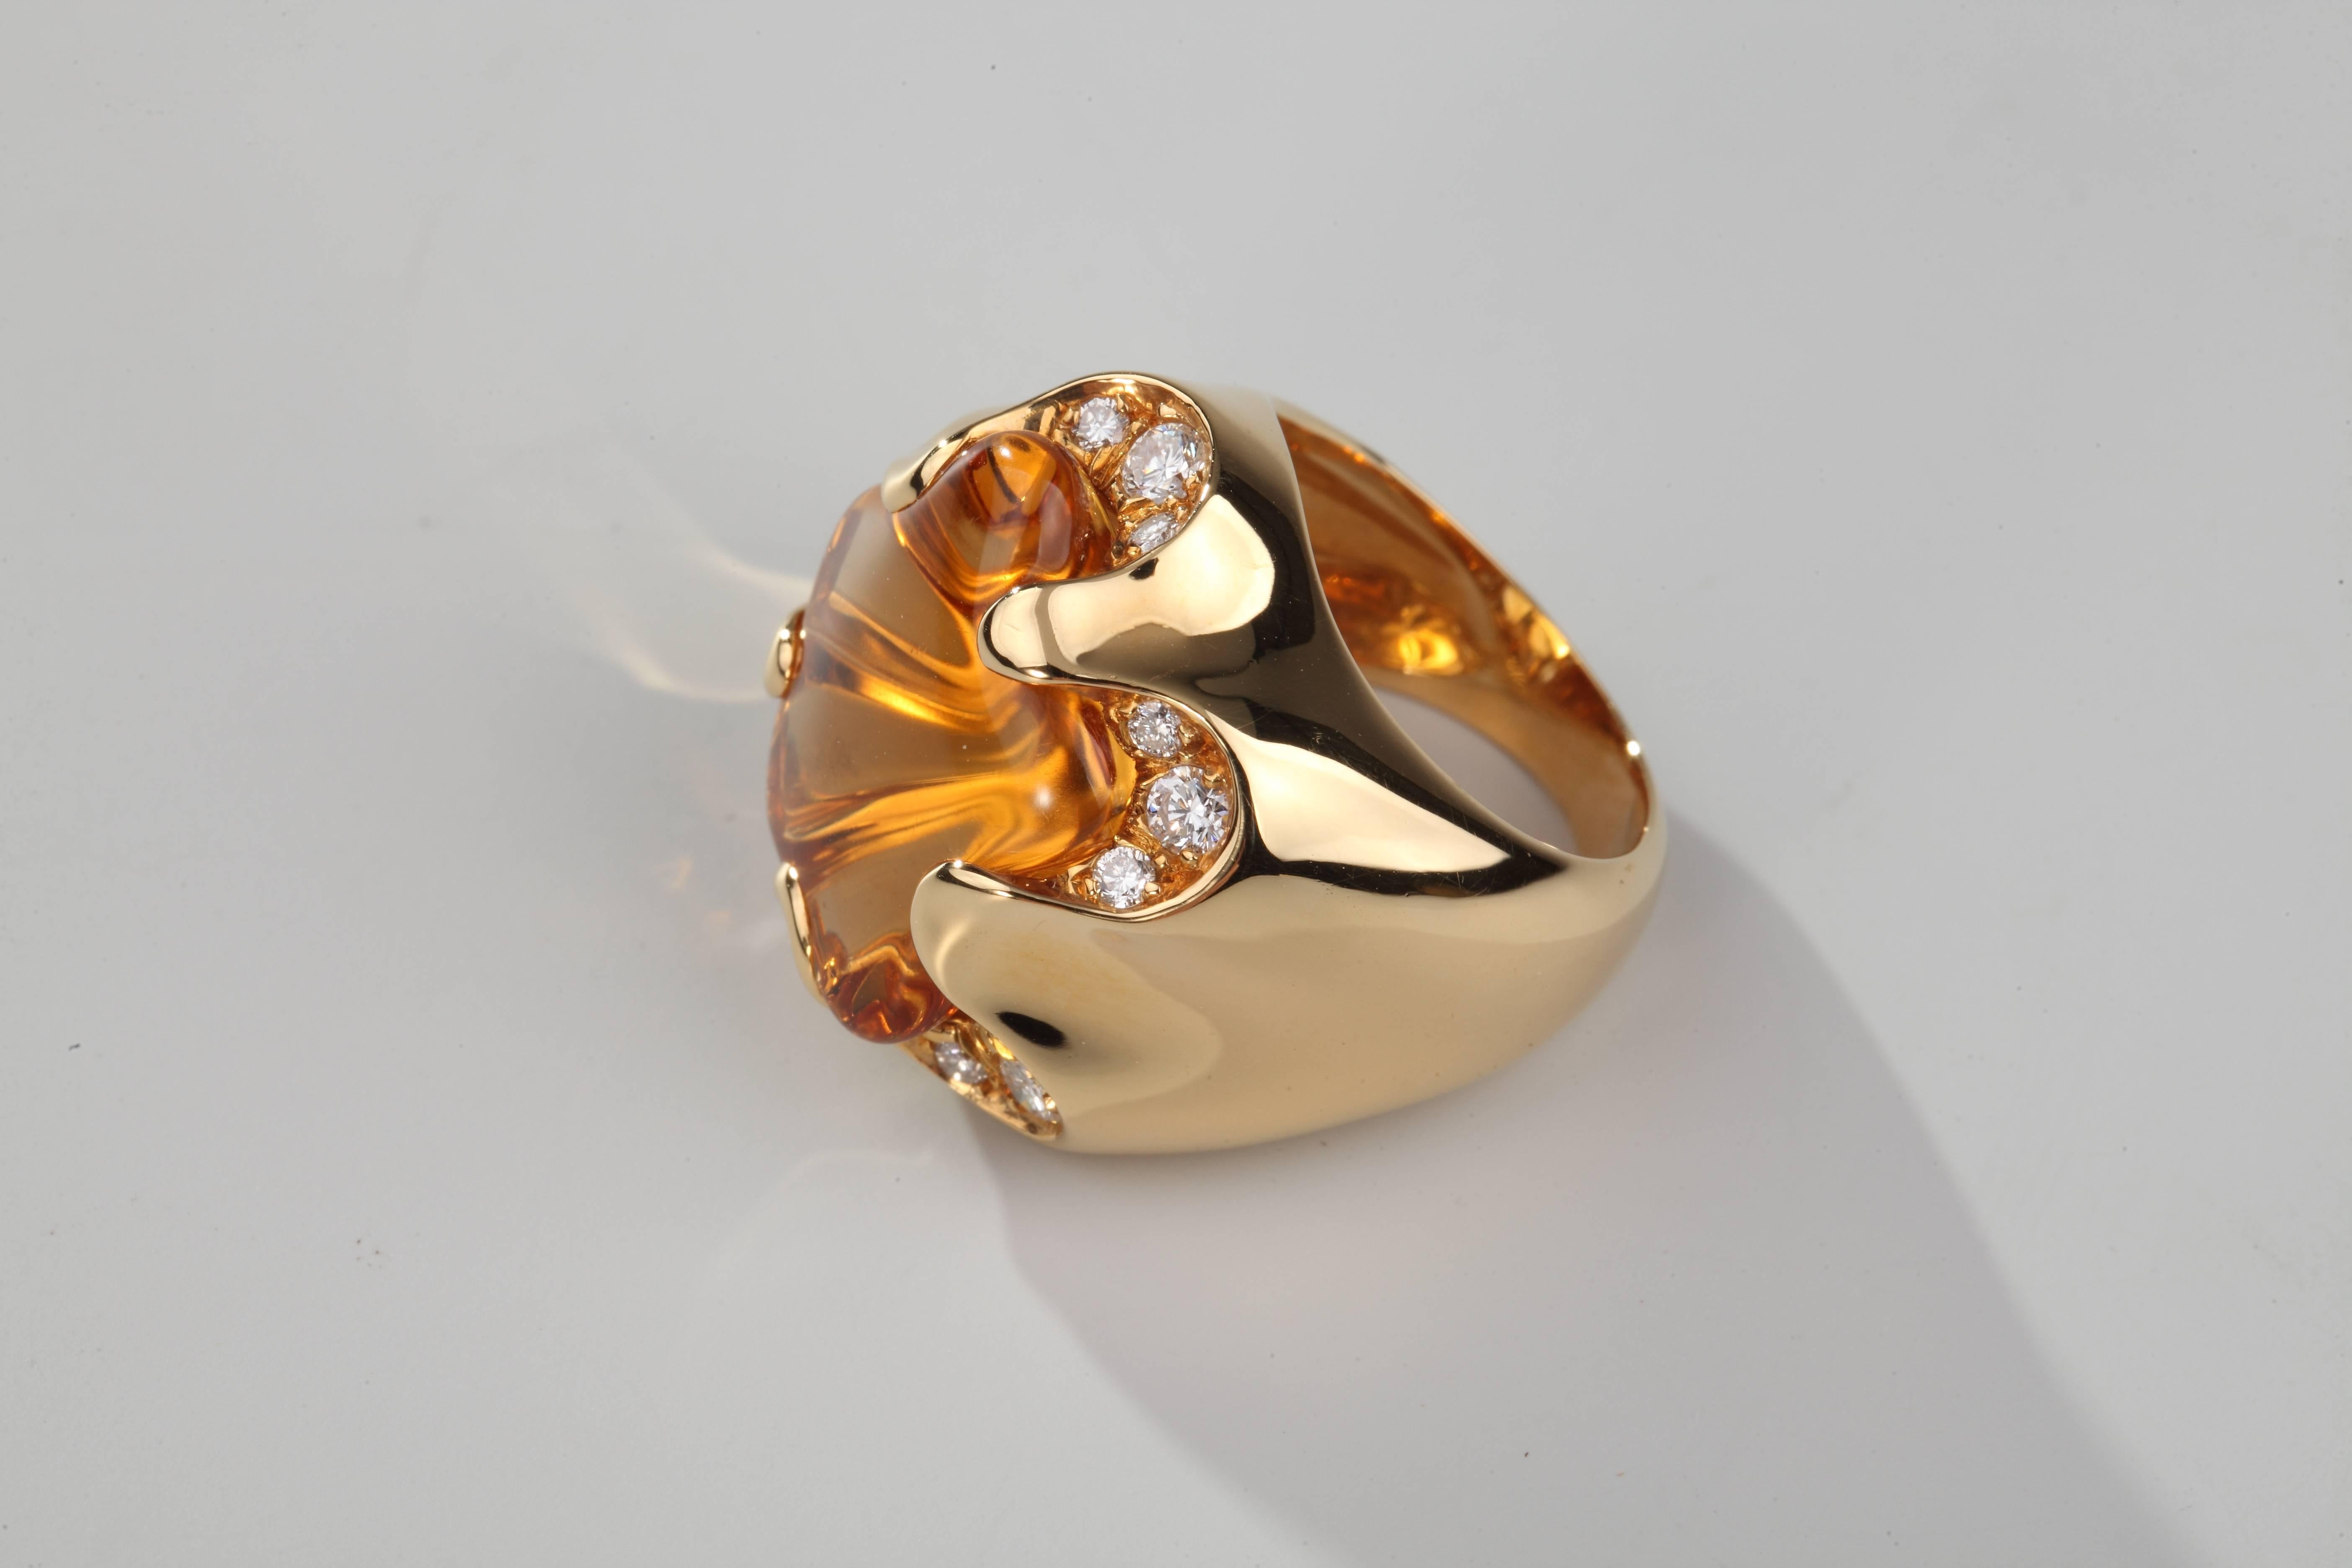 Original ring in 18k yellow gold, centered by a star-cut citrine (around 11,2 ct) set close with brillant-cut diamonds.
Signed Fred Paris and numbered.
French assay marks for gold.
Size :47 (US:4)
Can be resized.
